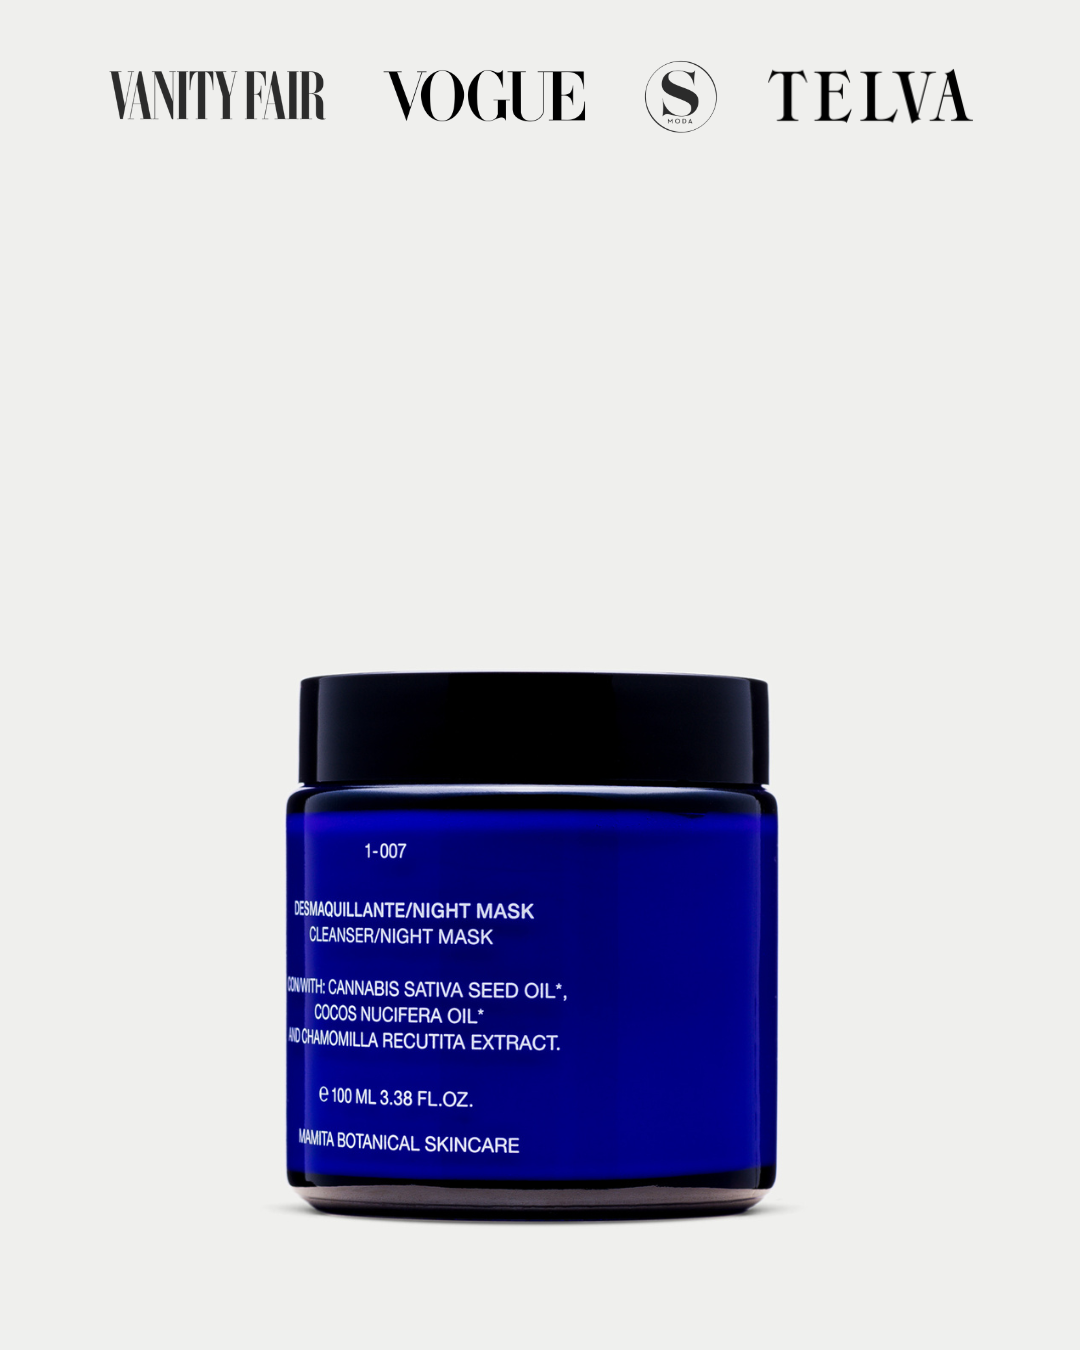 1-007 MAKEUP REMOVER/ NIGHT MASK